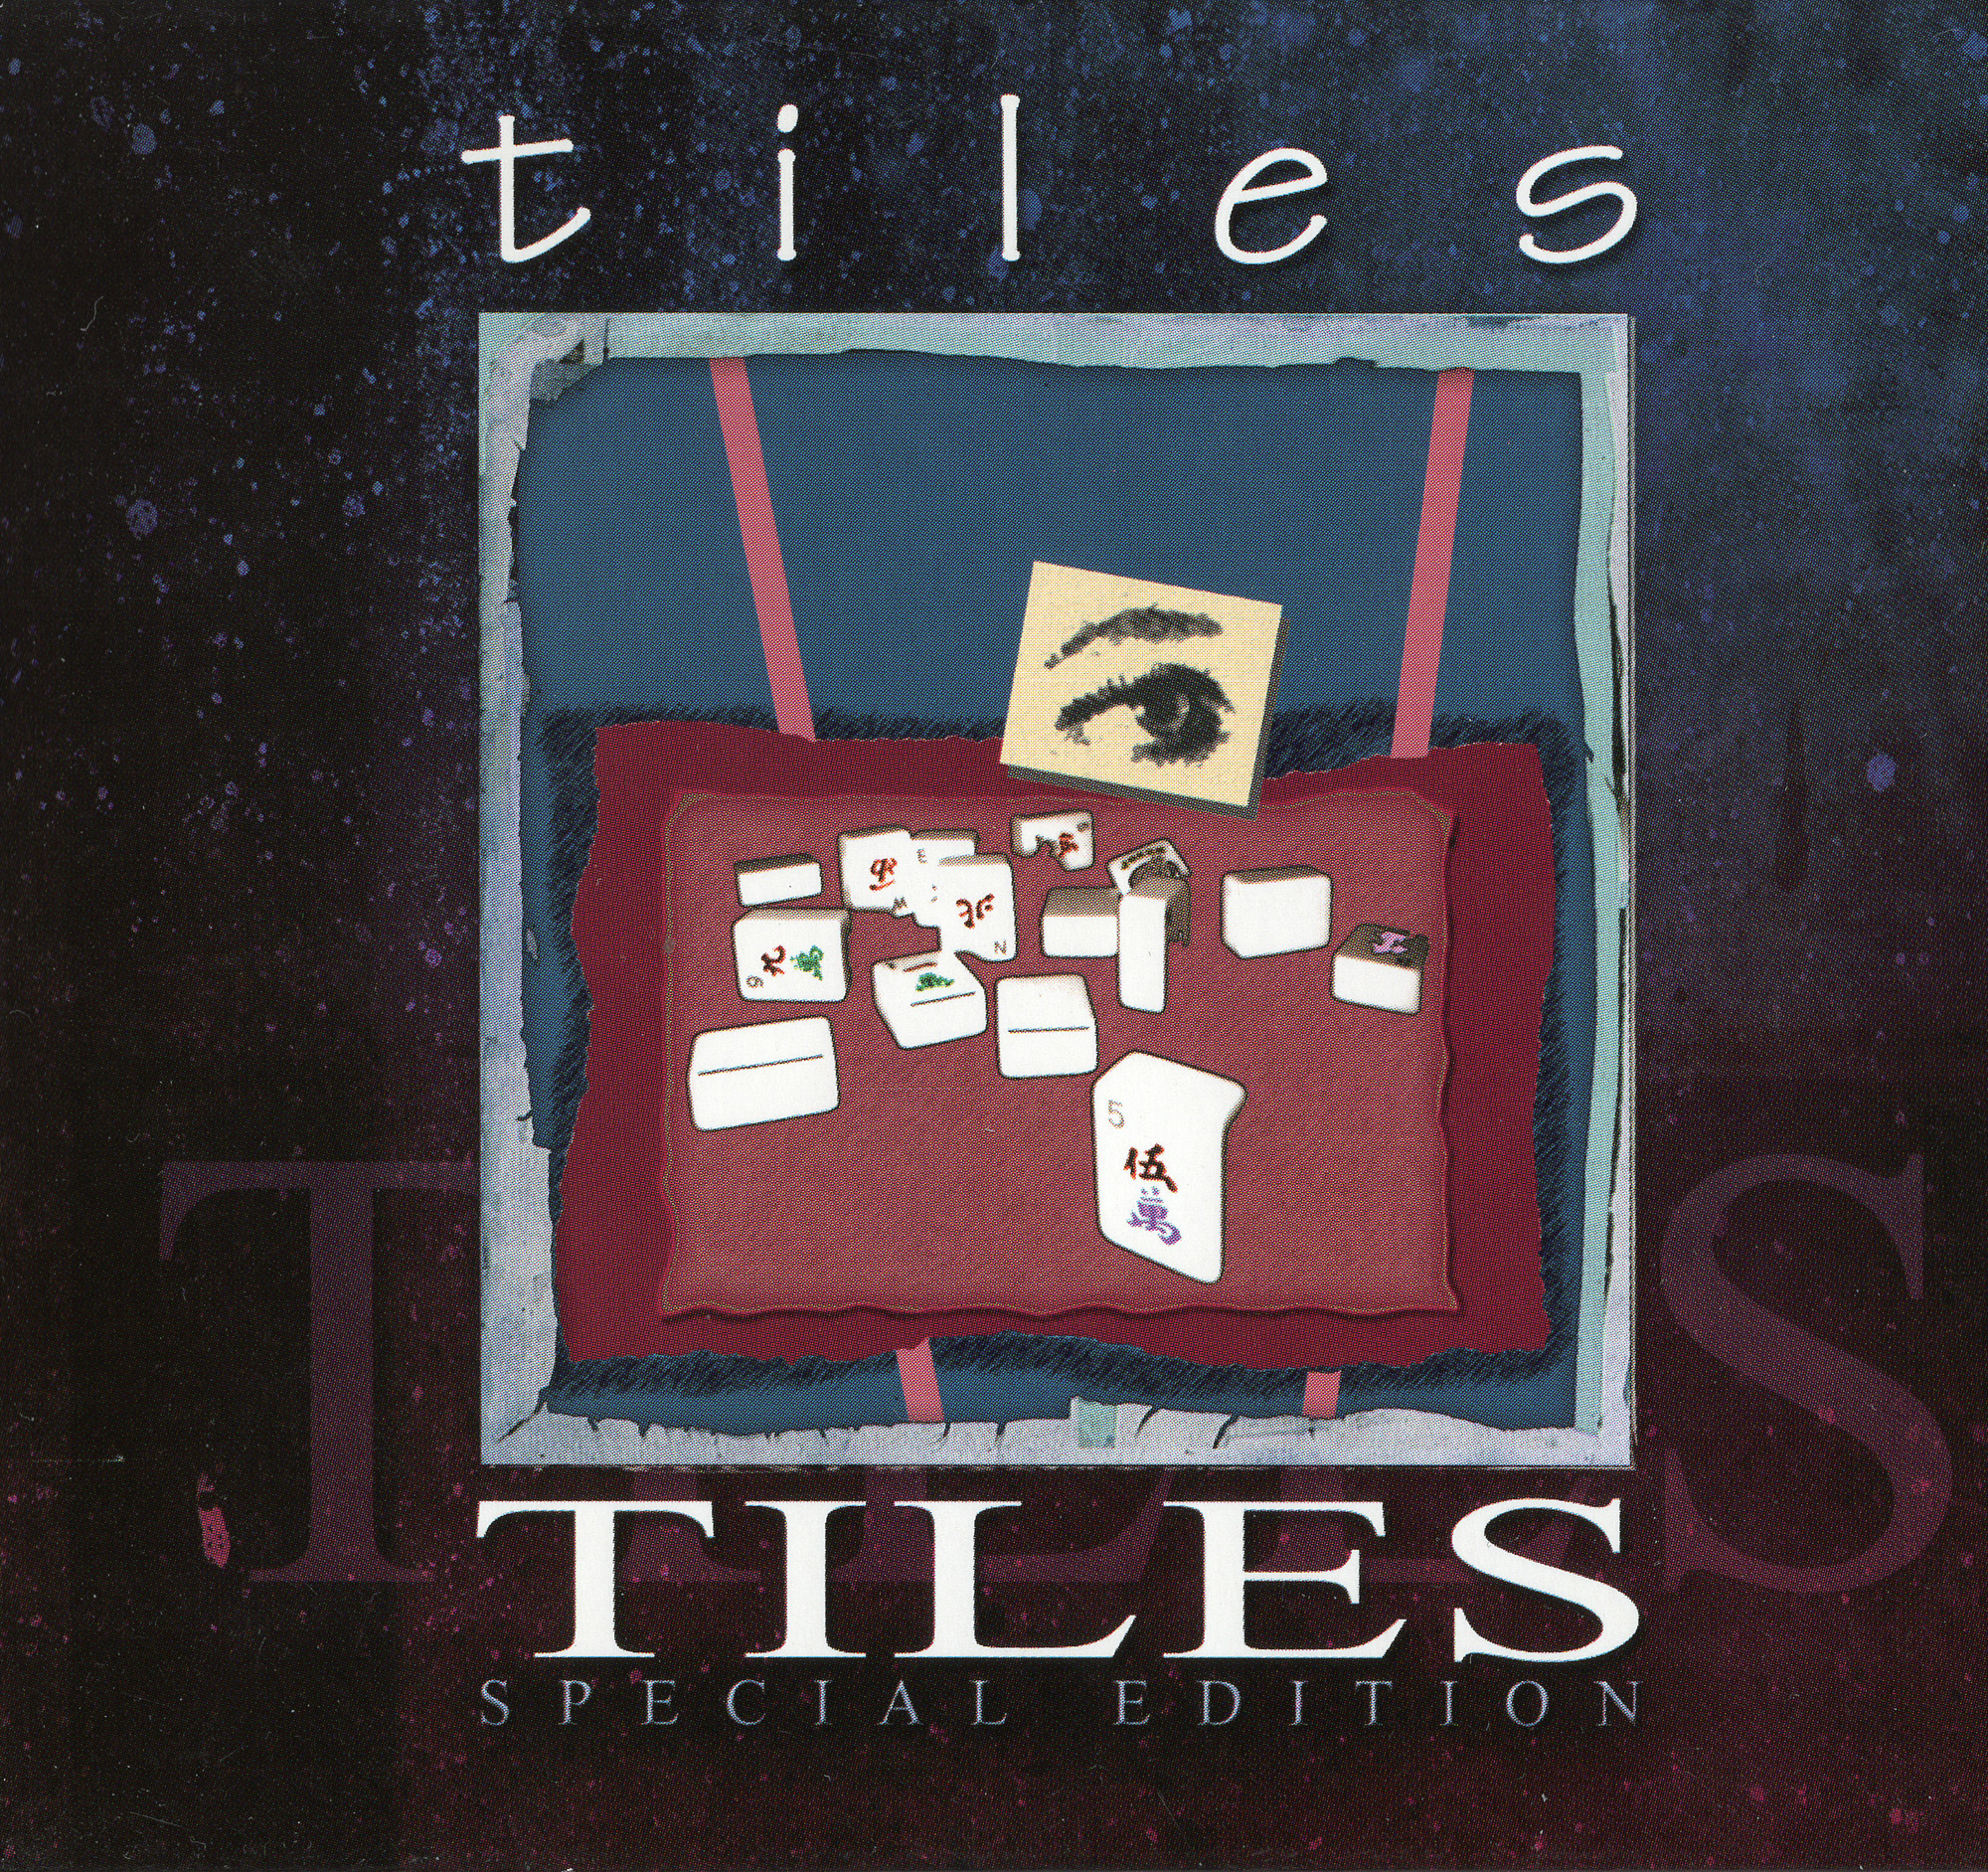 Tiles Special Edition Liner Notes